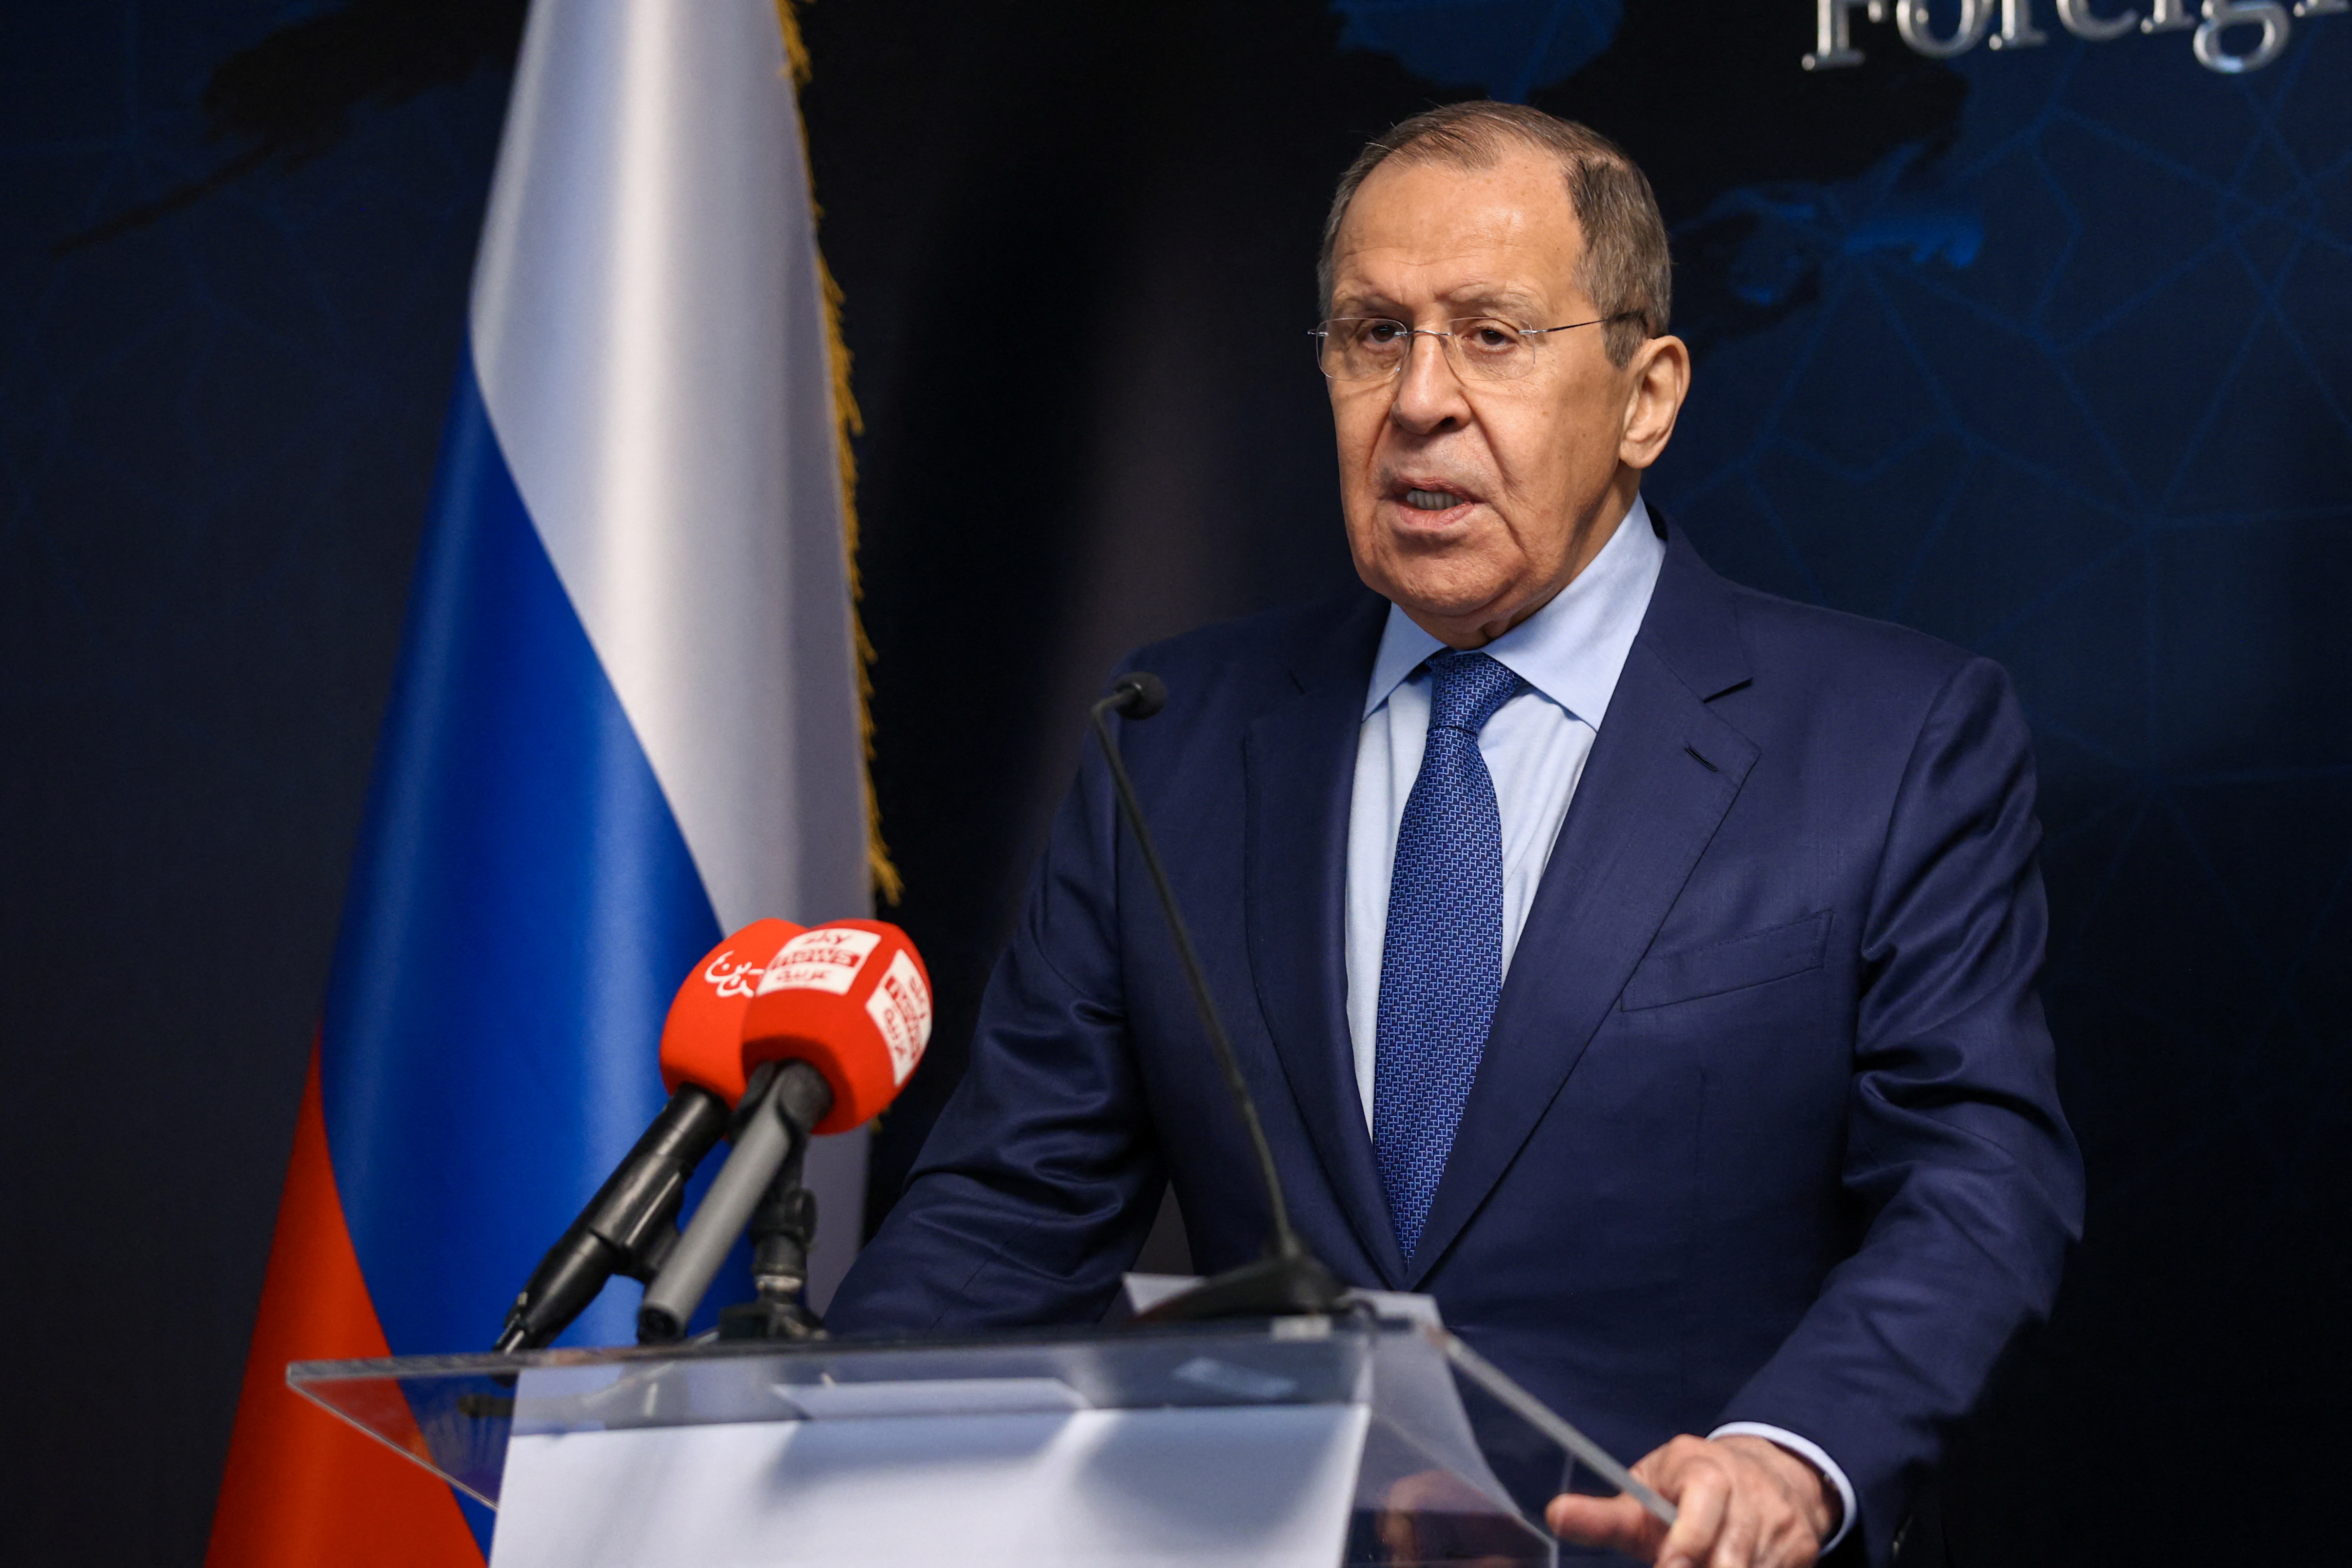 Russia's Foreign Minister Sergei Lavrov attends a news conference following talks with Bahrain's Foreign Minister Abdullatif Al Zayani in Manama, Bahrain May 31, 2022. Russian Foreign Ministry/Handout via REUTERS